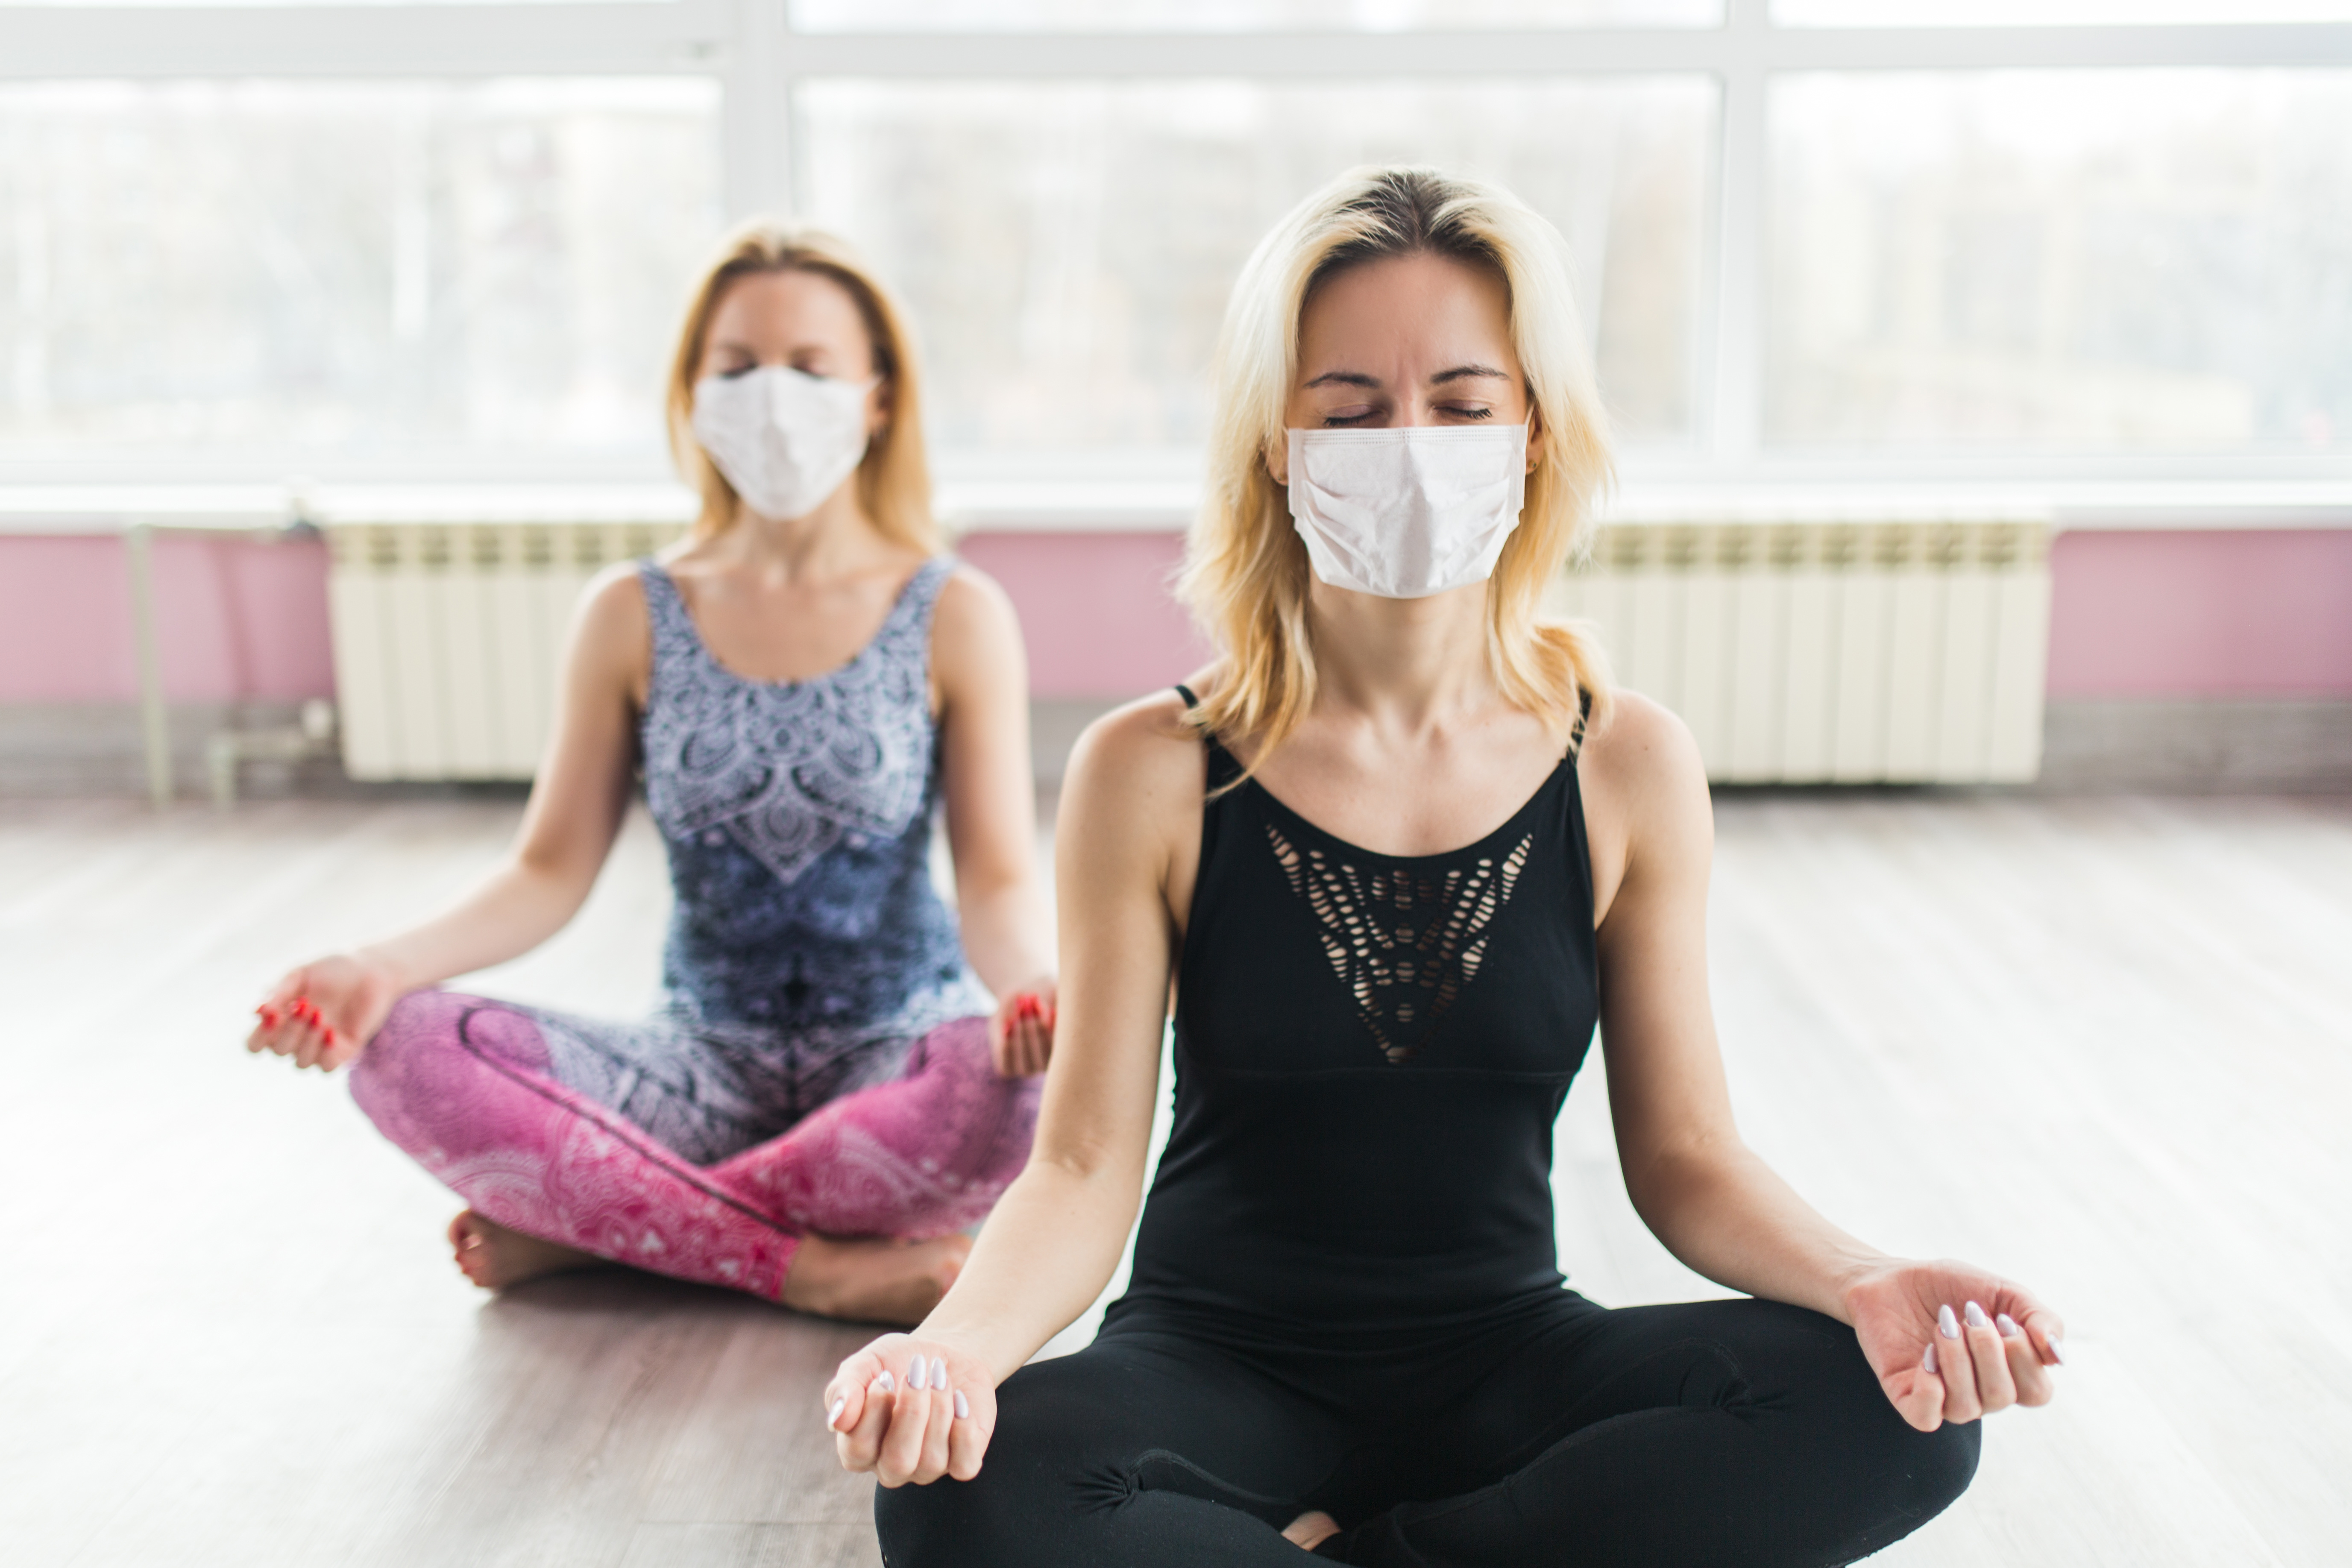 Can Yoga Help in Addiction Recovery? - Addiction Rehab Toronto